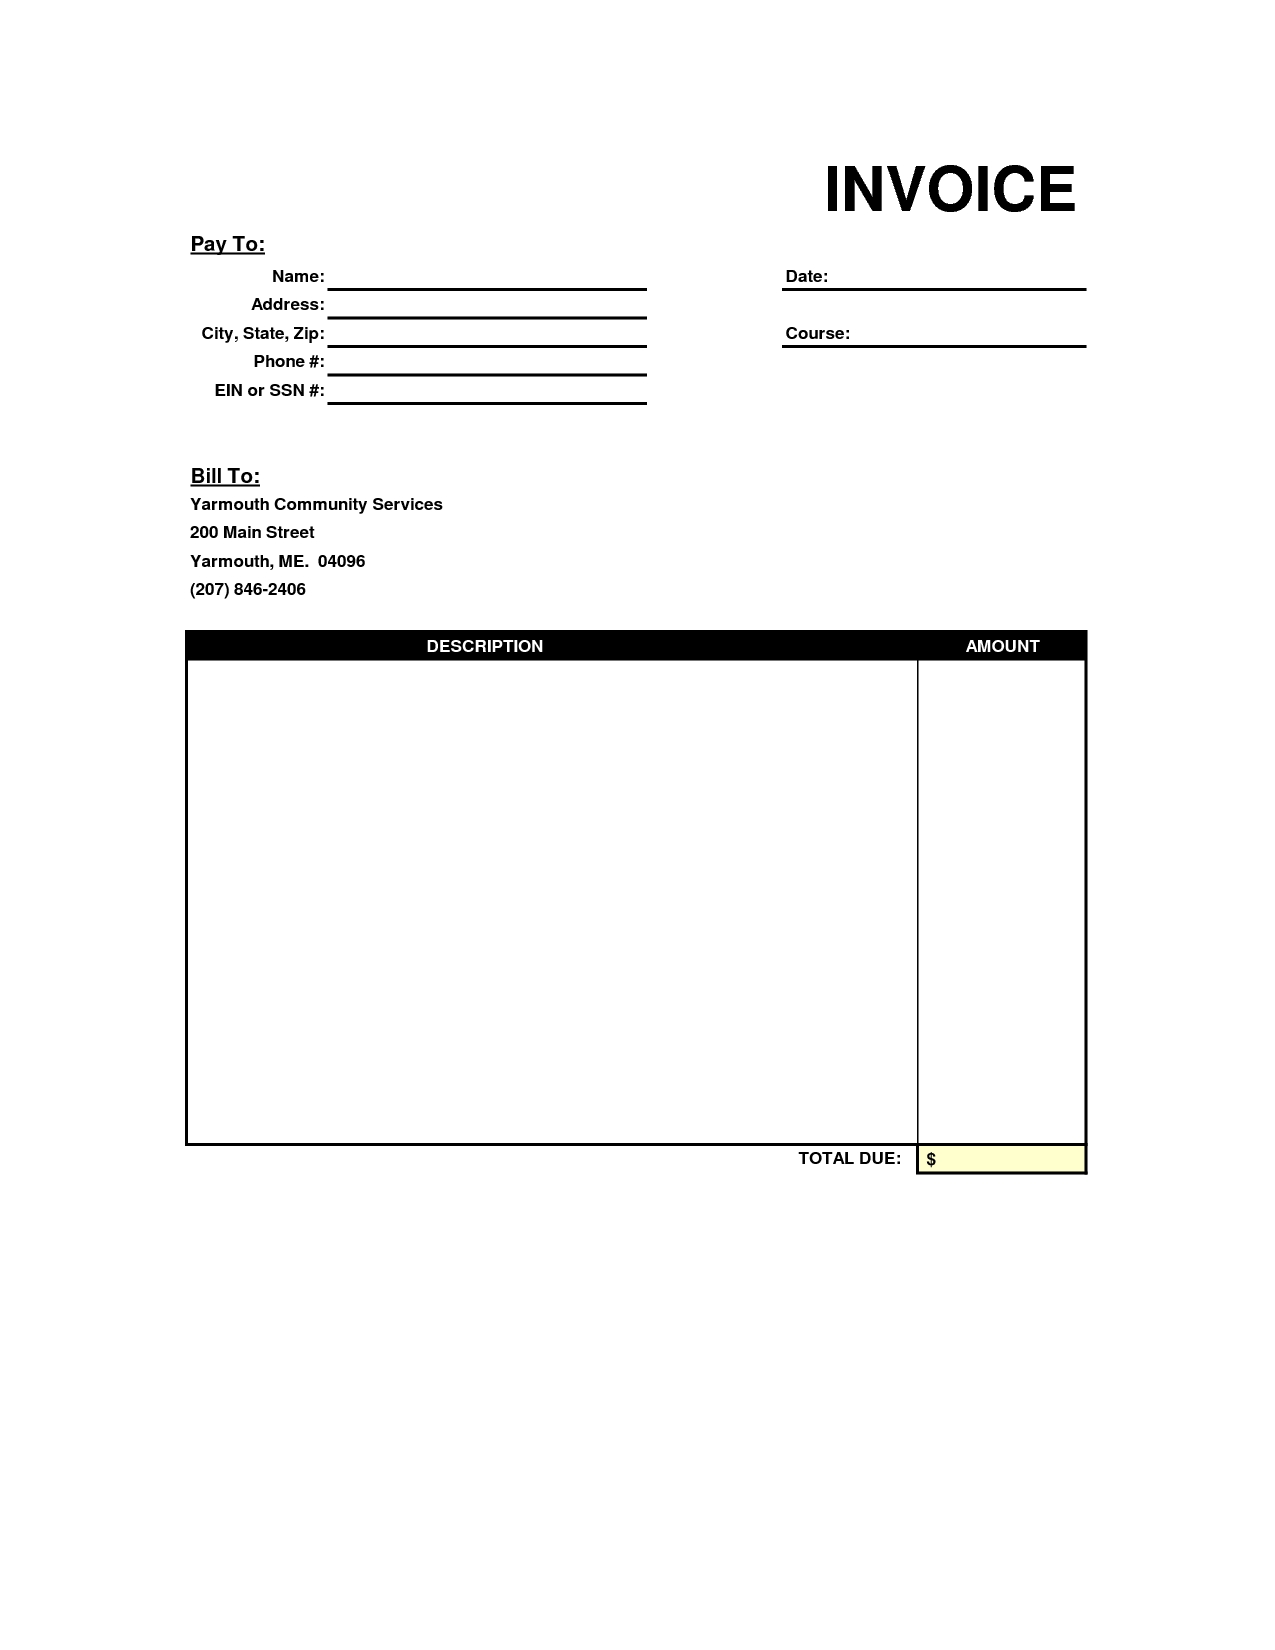 blank invoice template blank invoice sample of invoice format